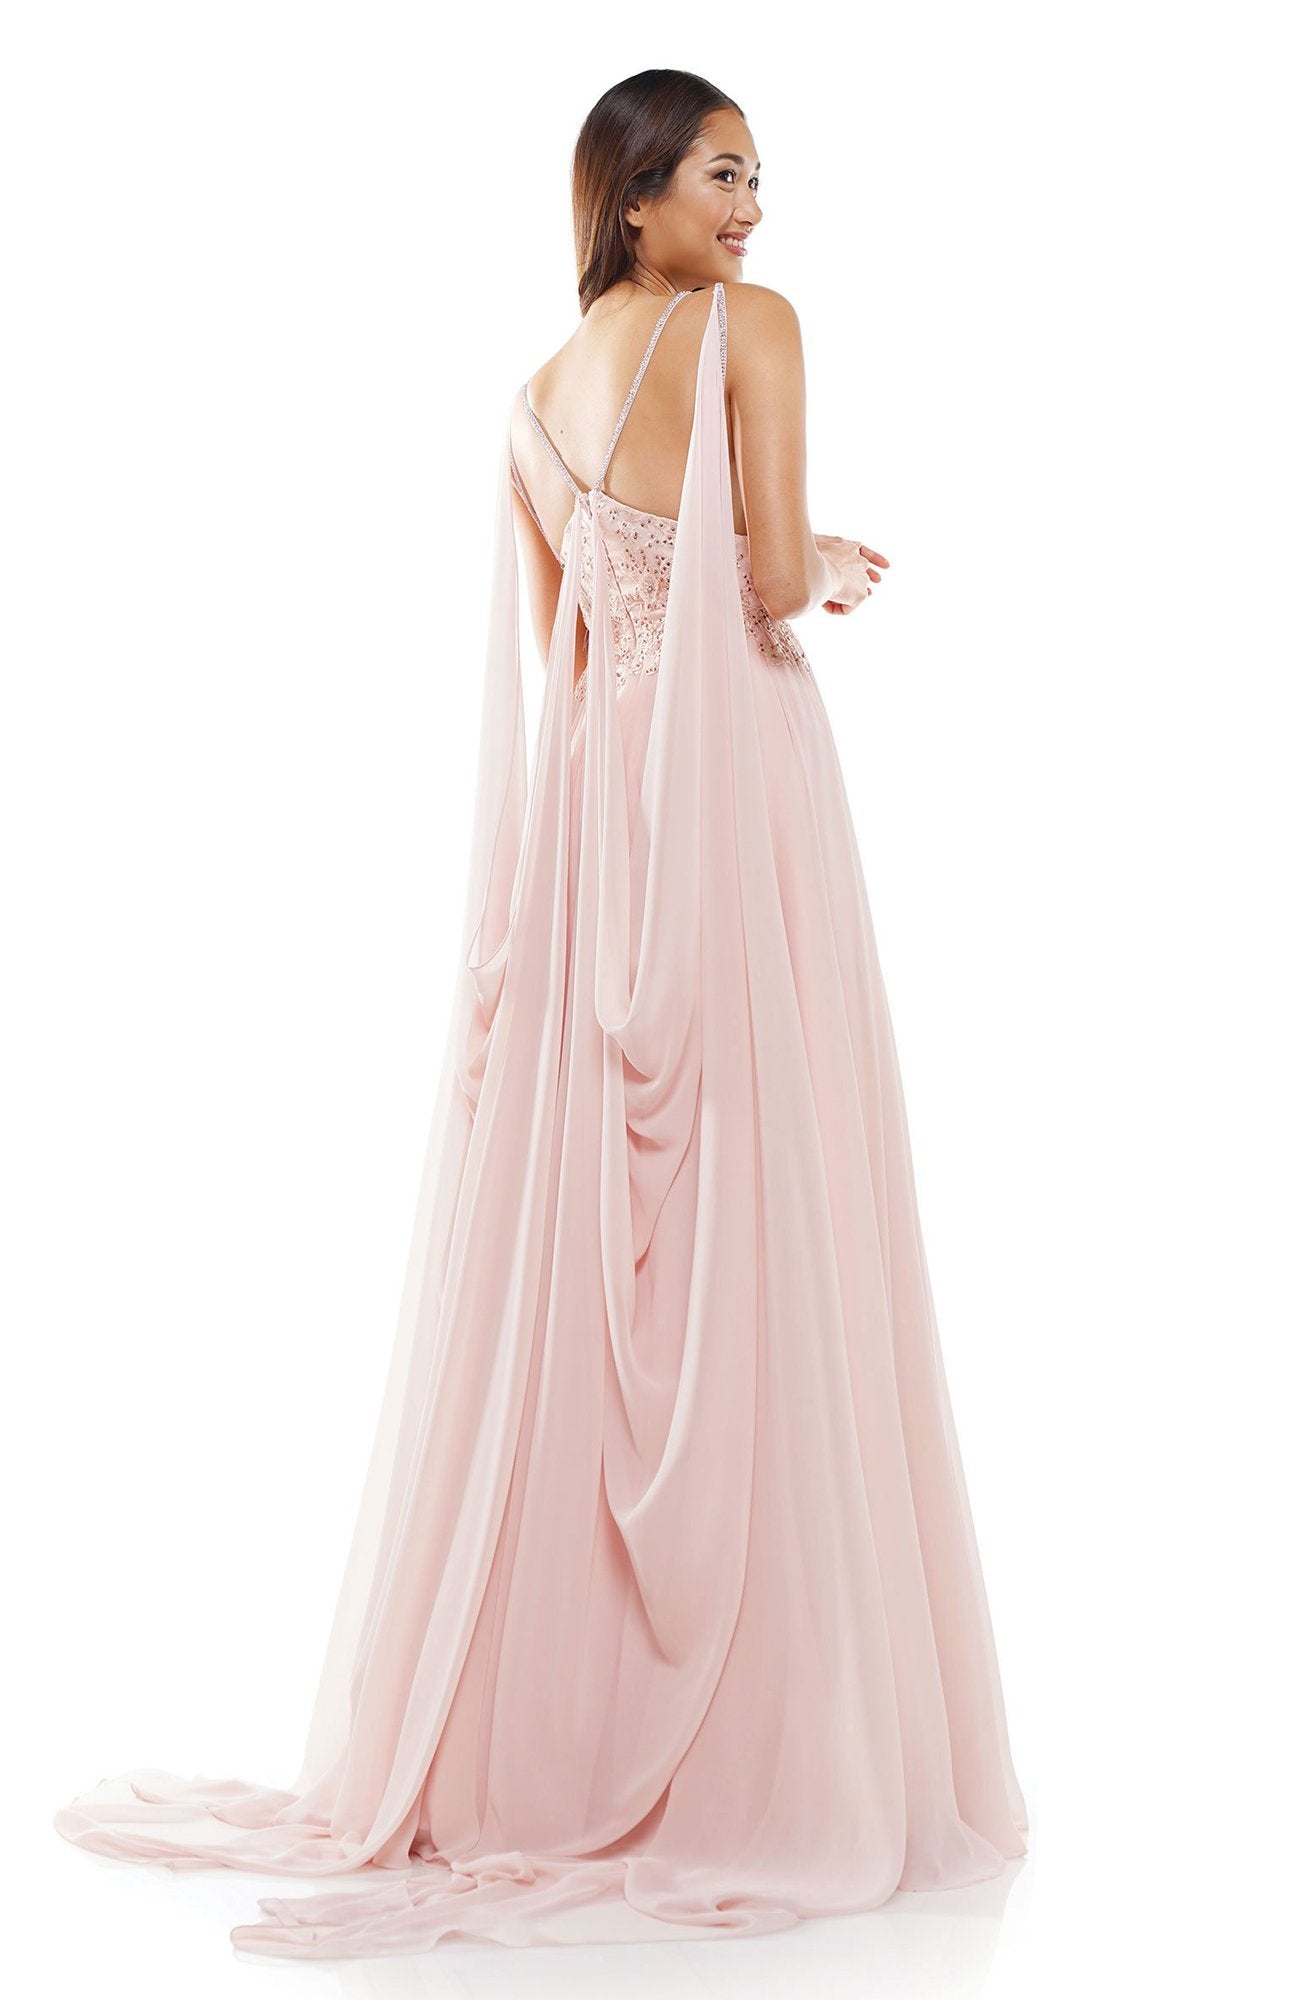 Glow Dress - G927 Beaded Lace Chiffon A-Line Gown with Long Drape Cape In Pink